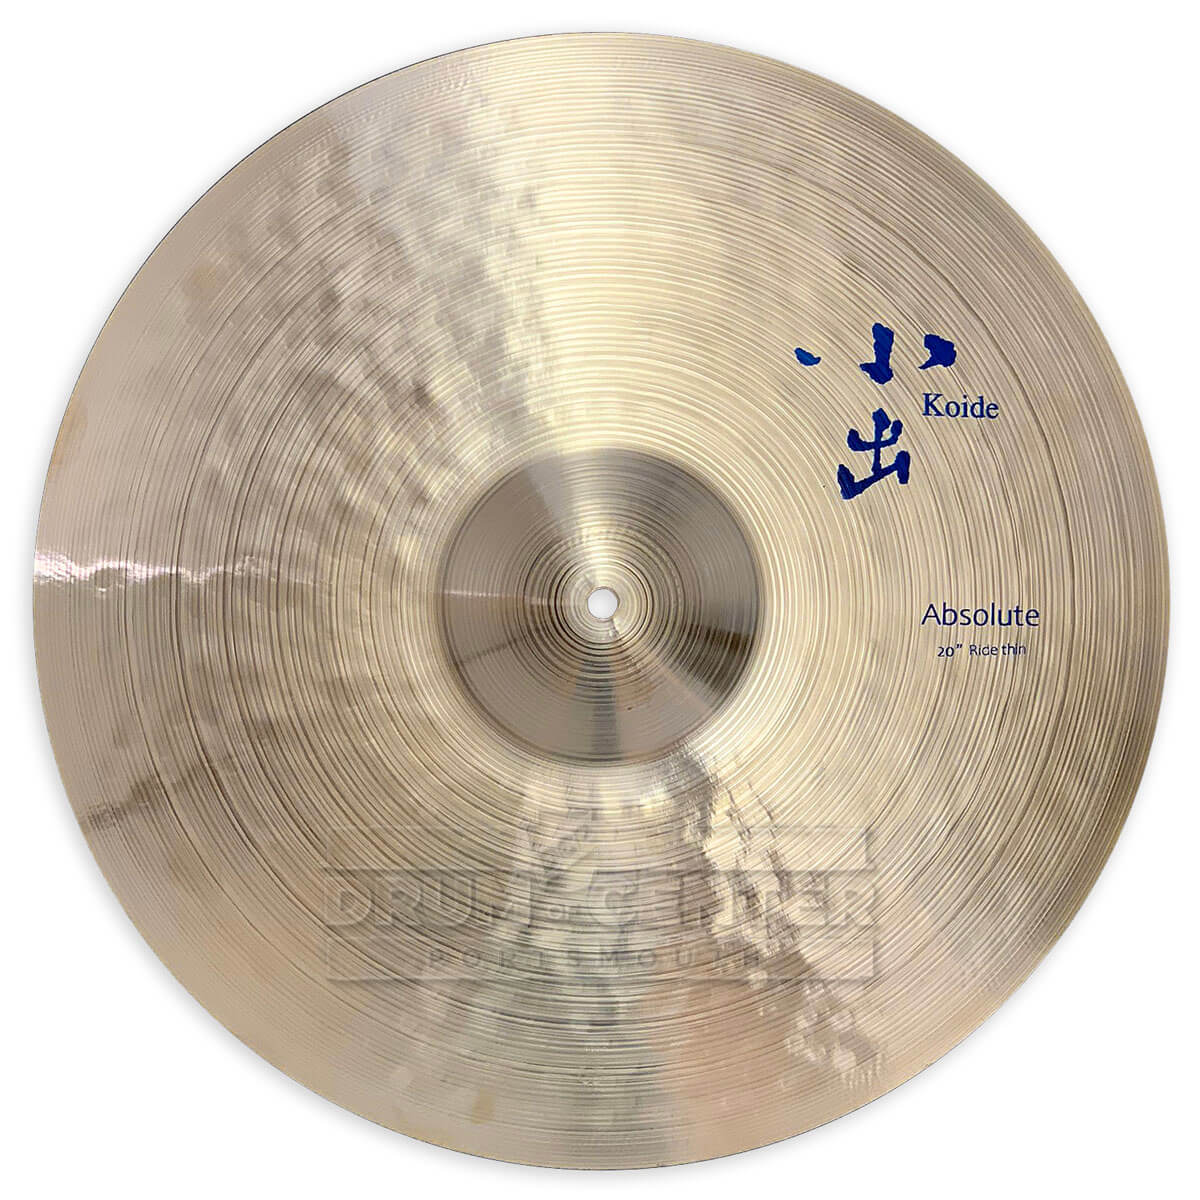 Koide Absolute Thin Ride Cymbal 20" 1 grams - Drum Center Of Portsmouth